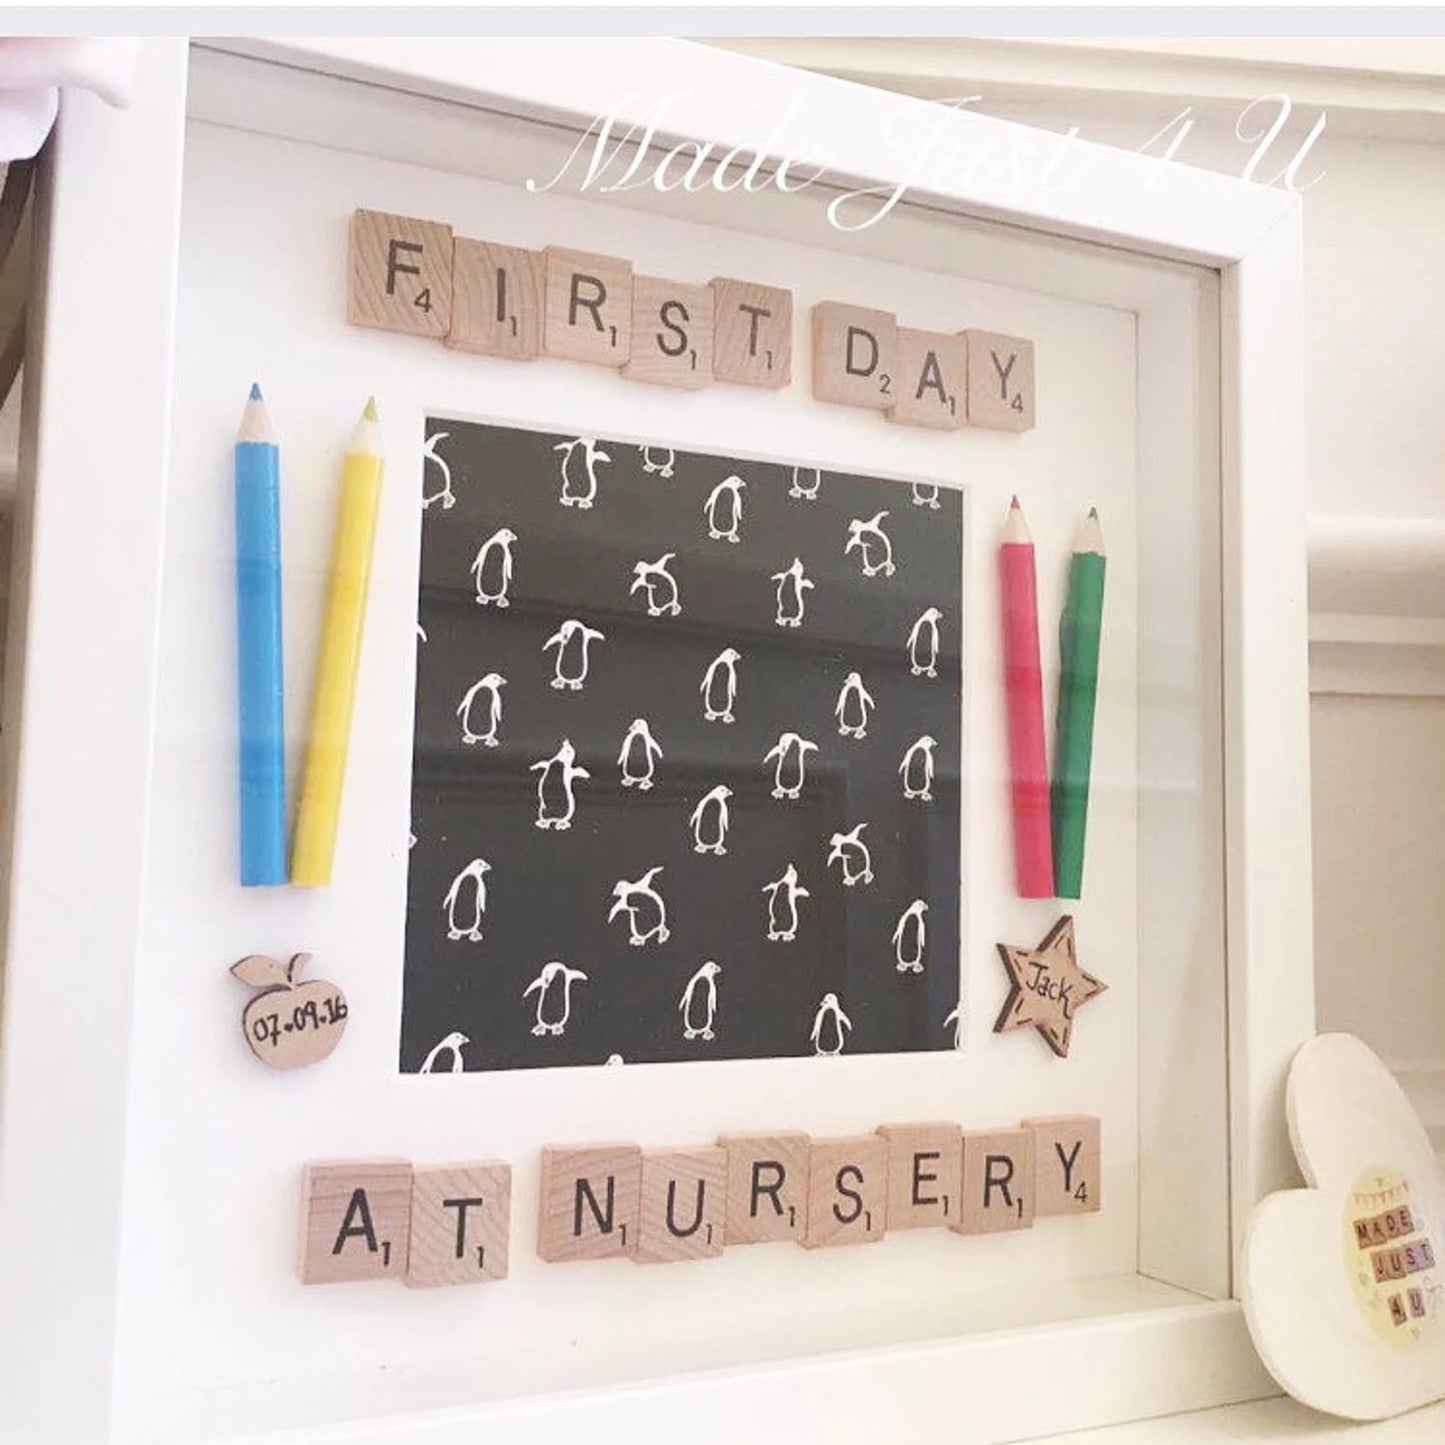 First day at school gift / Starting school or Pre school memory frame